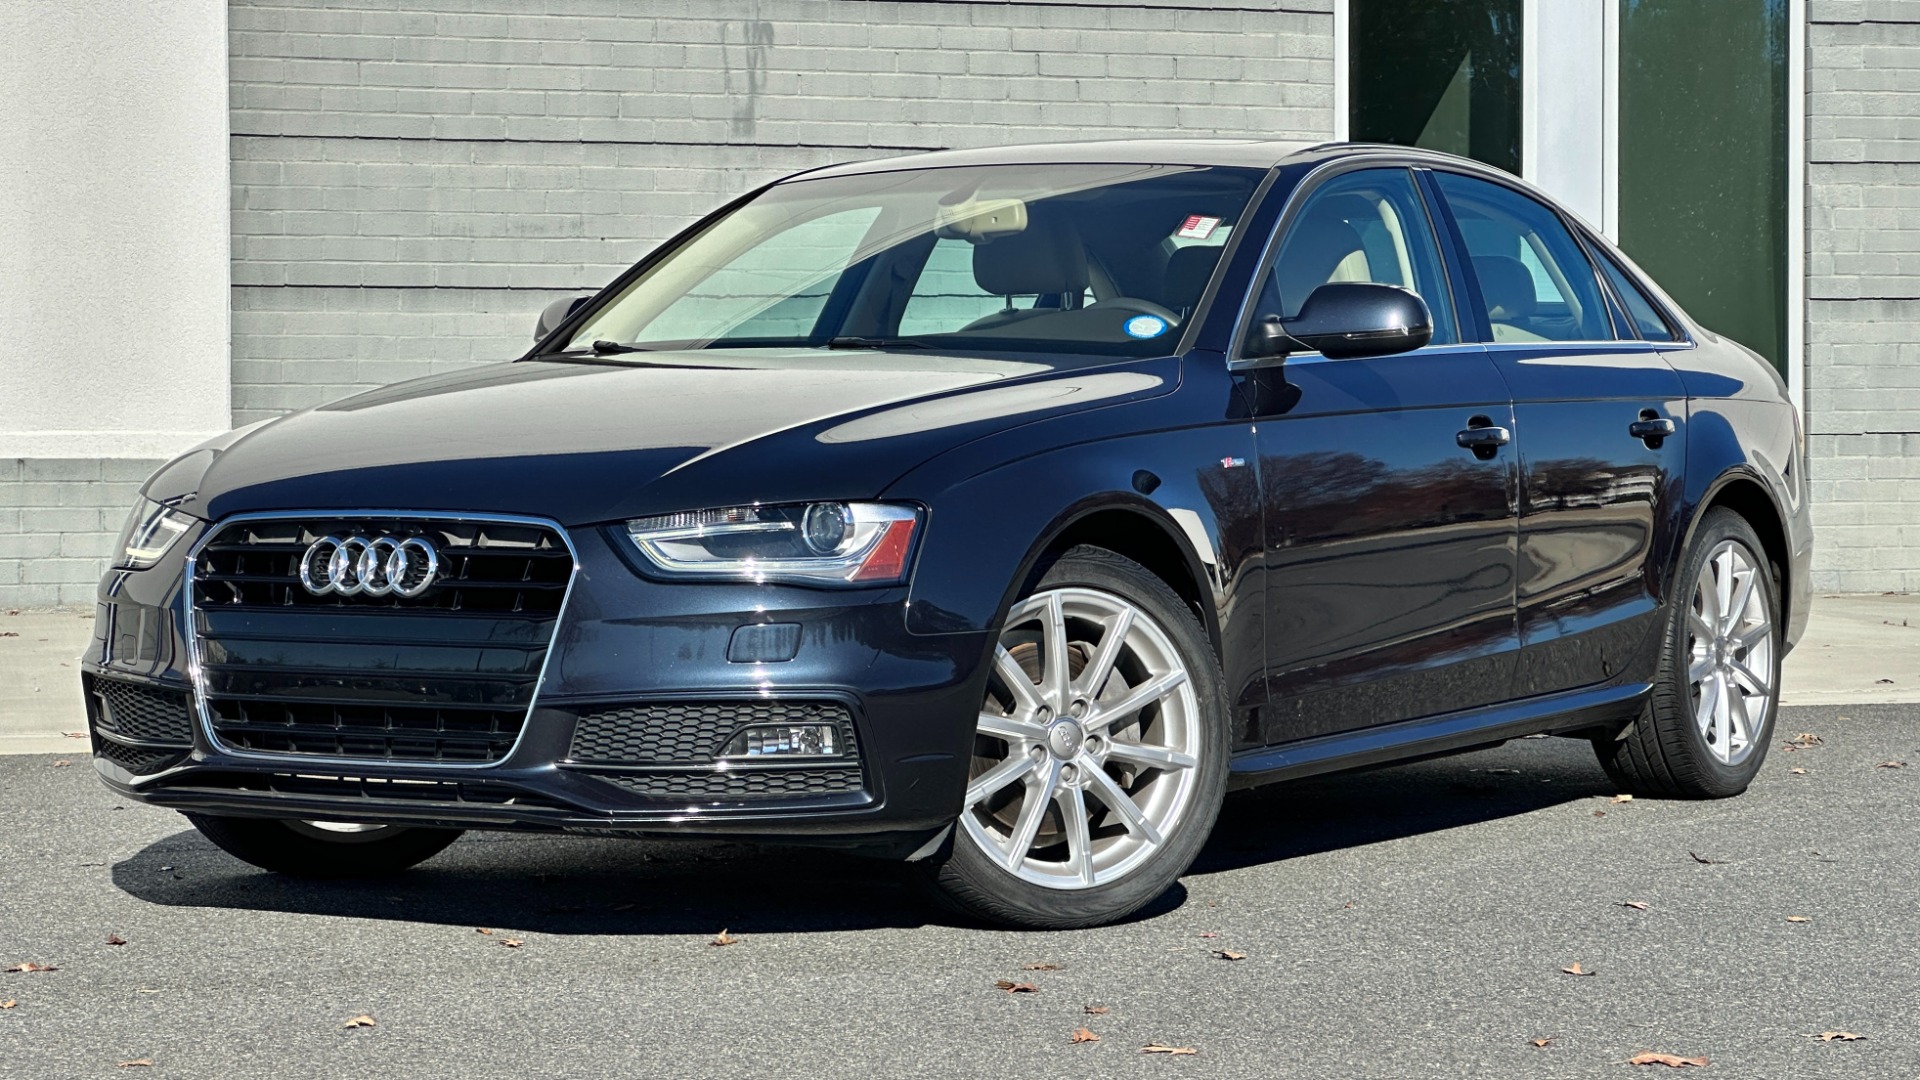 Used 2014 Audi A4 PREMIUM PLUS / NAVIGATION PLUS / BLINDSPOT ASSIST / LEATHER / SUNROOF for sale $19,298 at Formula Imports in Charlotte NC 28227 1